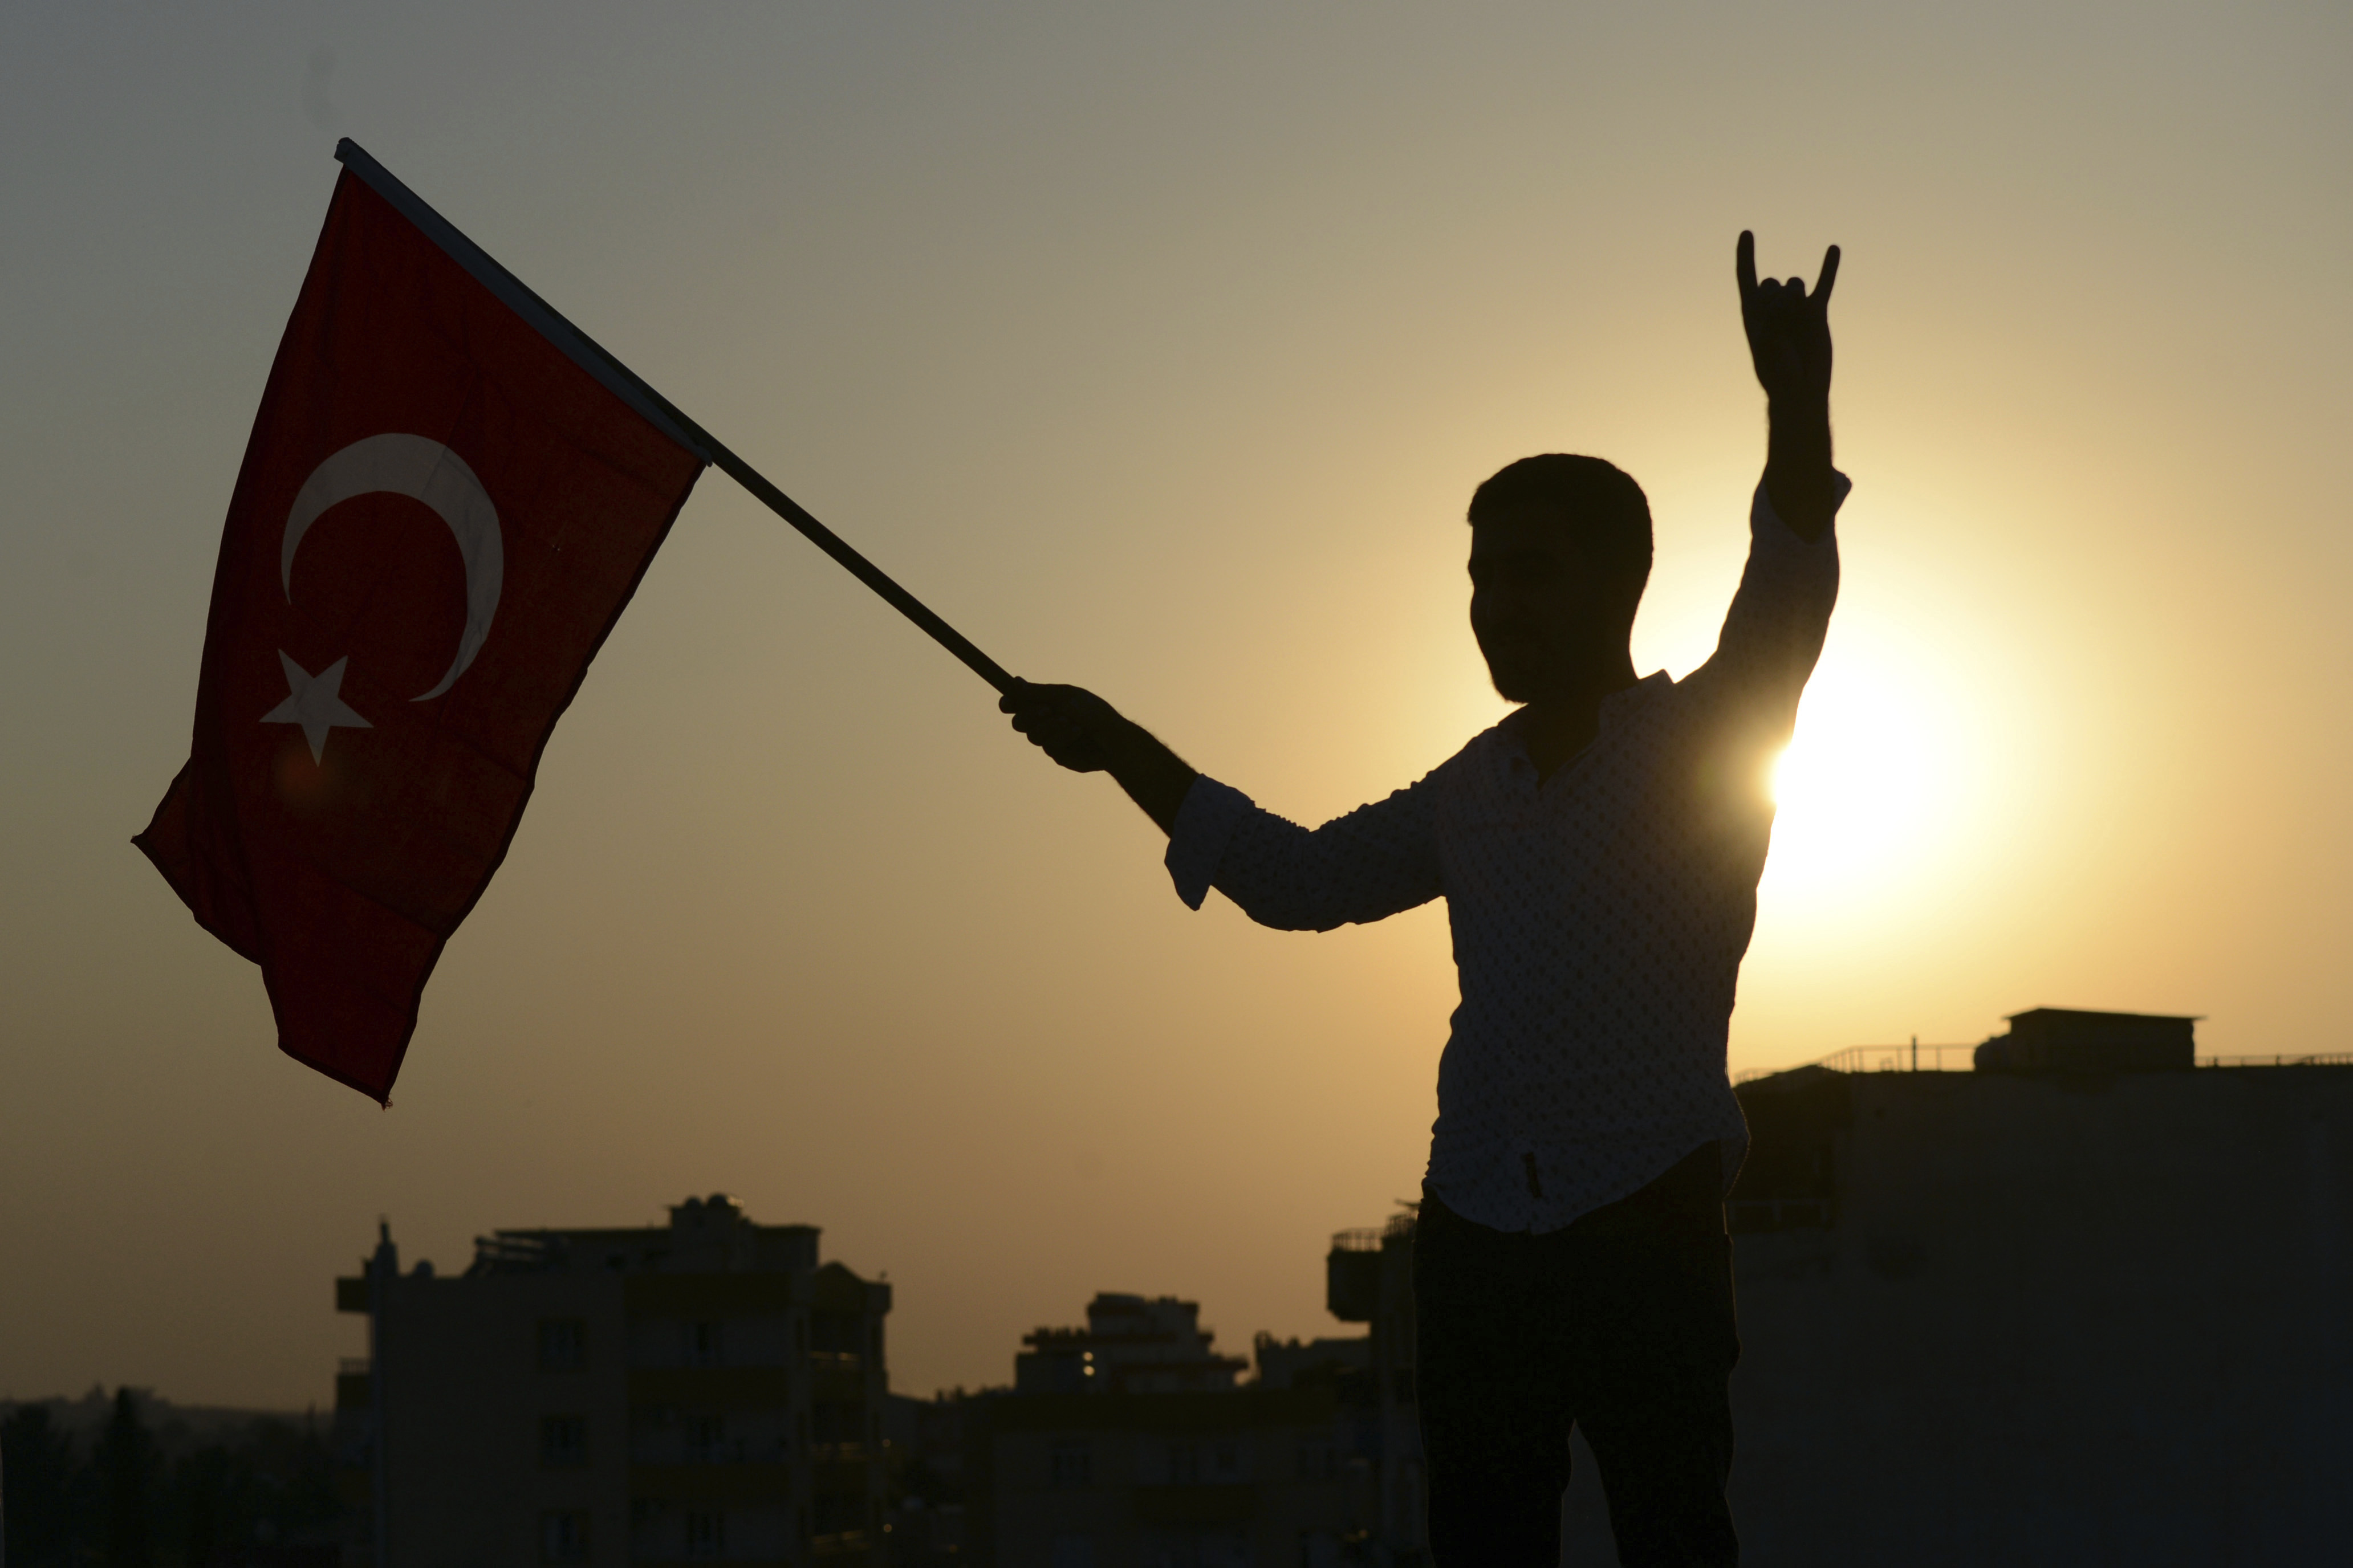 A Turkish youth celebrates with a national flag after news about Syrian town of Tal Abyad, in Turkish border town of Akcakale, in Sanliurfa province, Sunday, Oct. 13, 2019. Turkey's official Anadolu news agency, meanwhile, said Turkey-backed Syrian forces have advanced into the center of a Syrian border town, Tal Abyad, on the fifth day of Turkey's military offensive. (Ismail Coskun/IHA via AP)